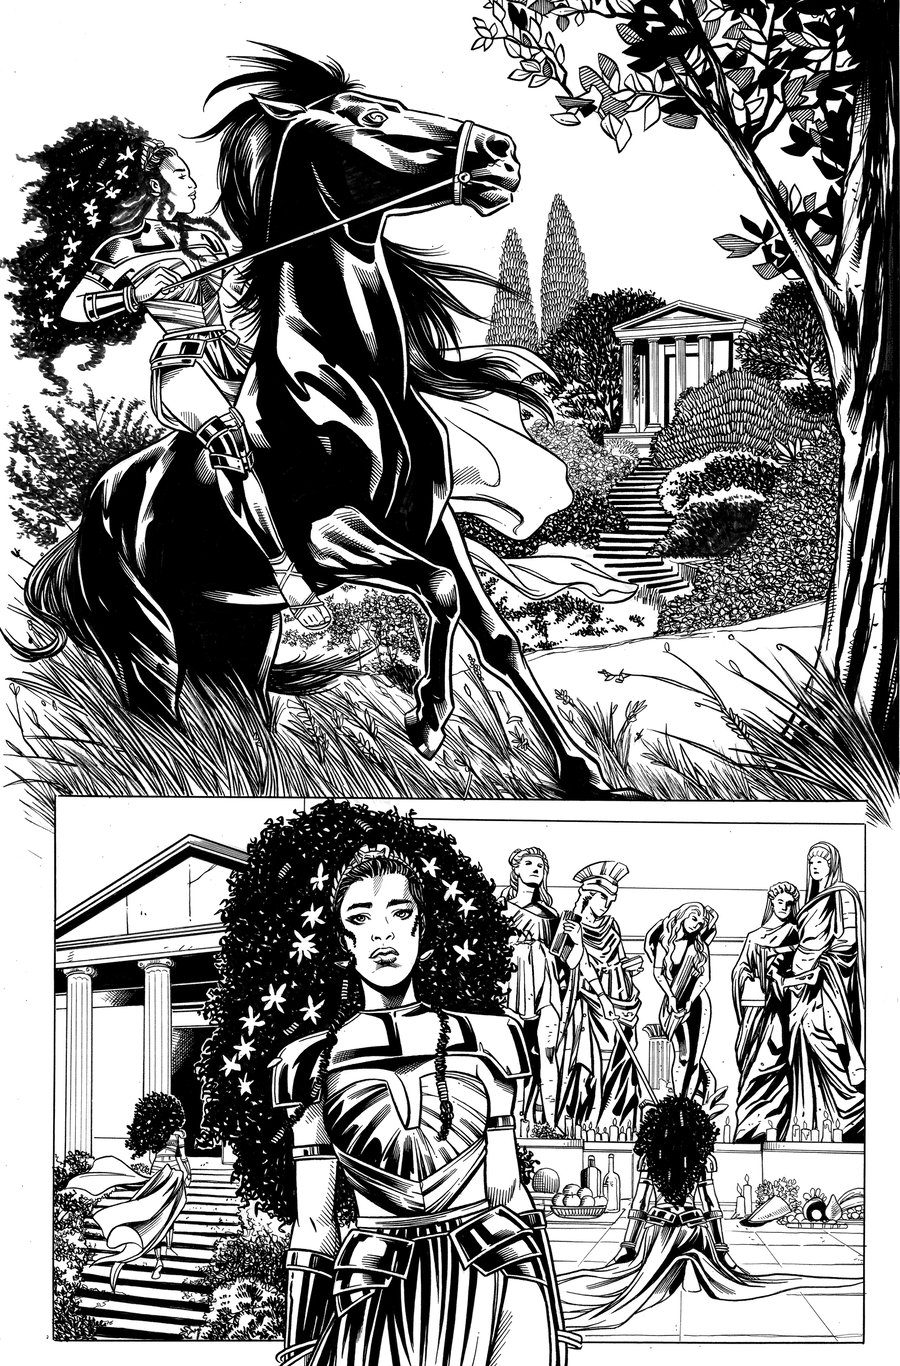 Image of Nubia and the Amazons #2 PG 1